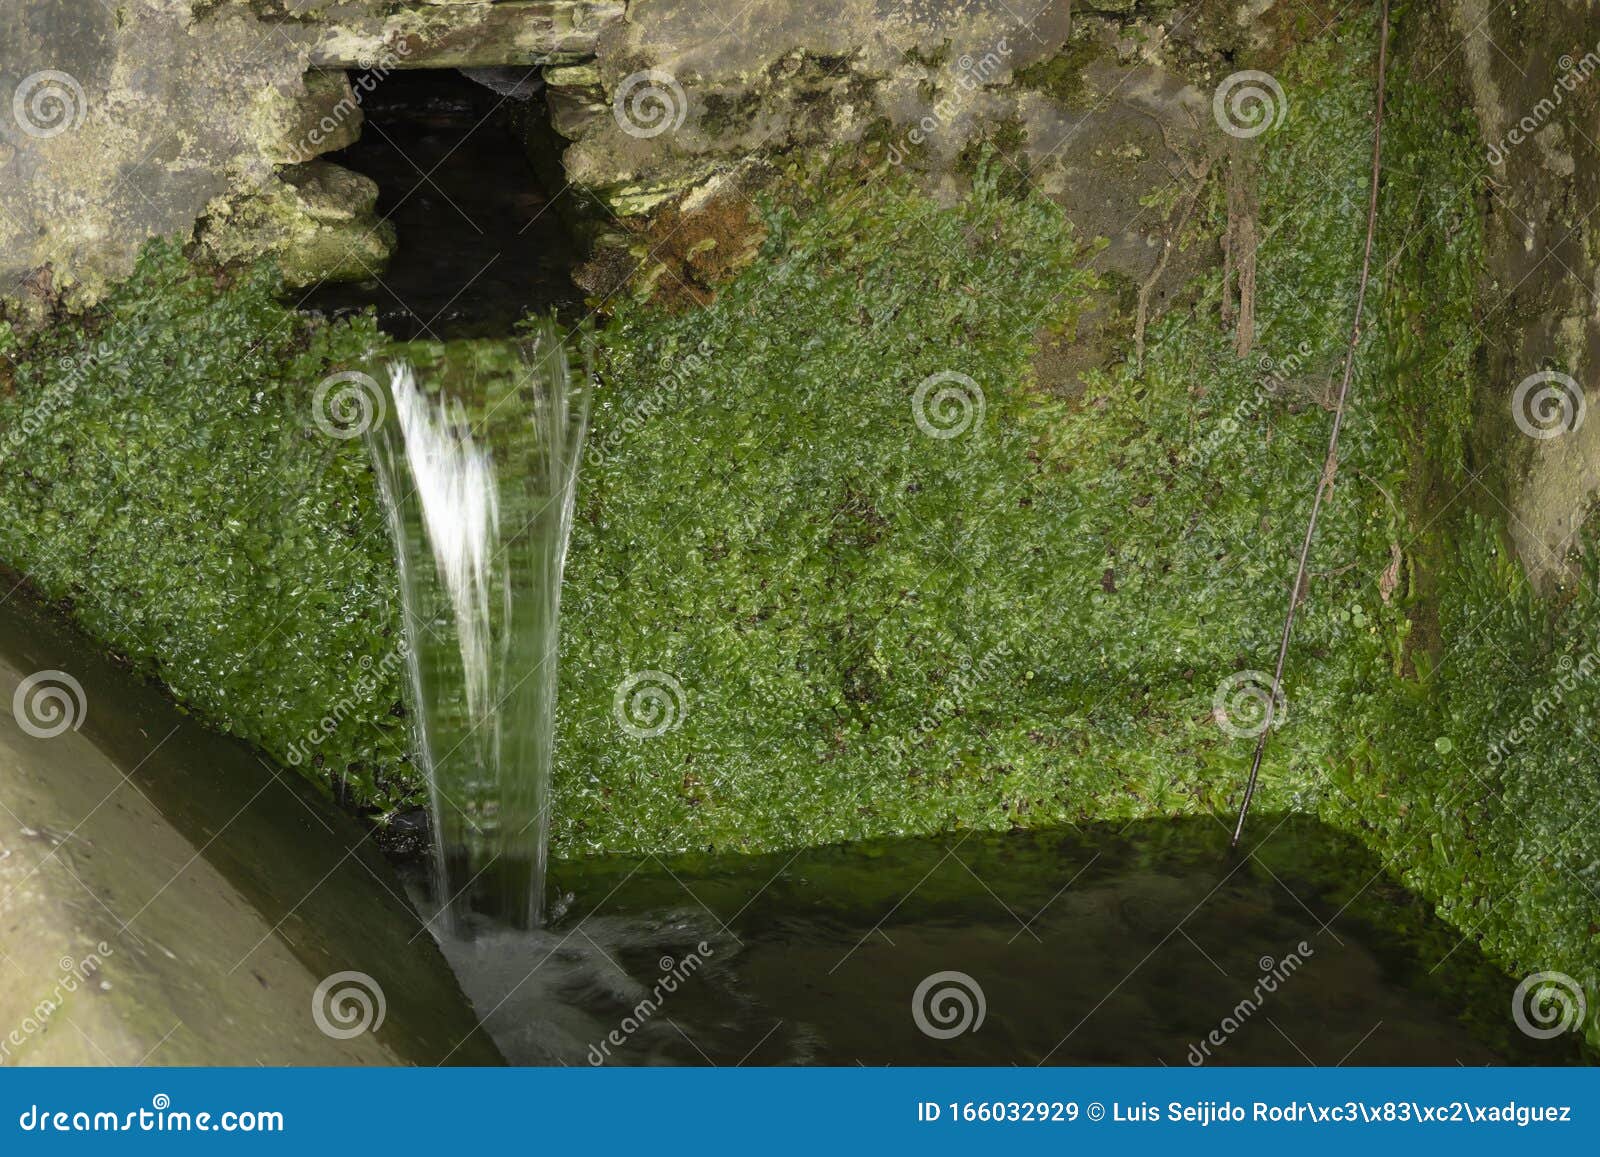 rustic fountain of a mountain village